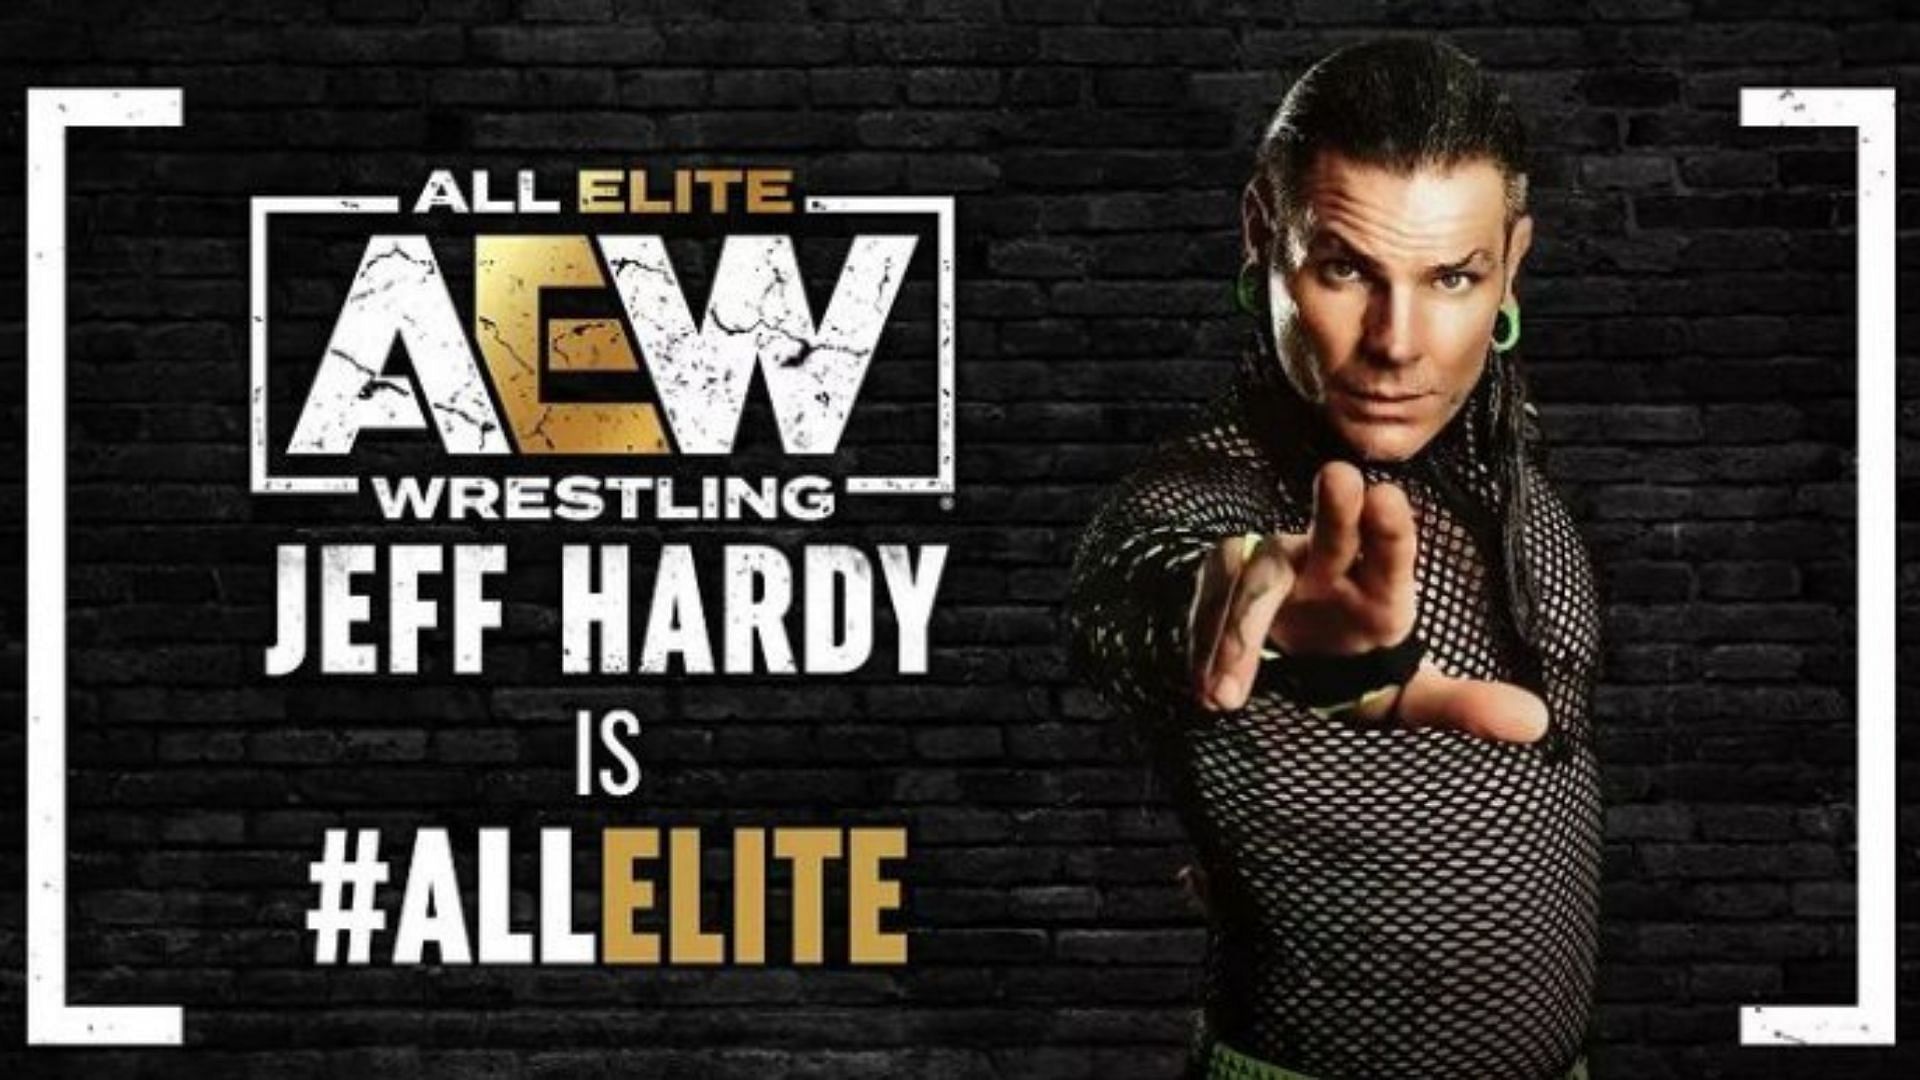 Jeff Hardy was announced as All-Elite shortly after his Dynamite debut